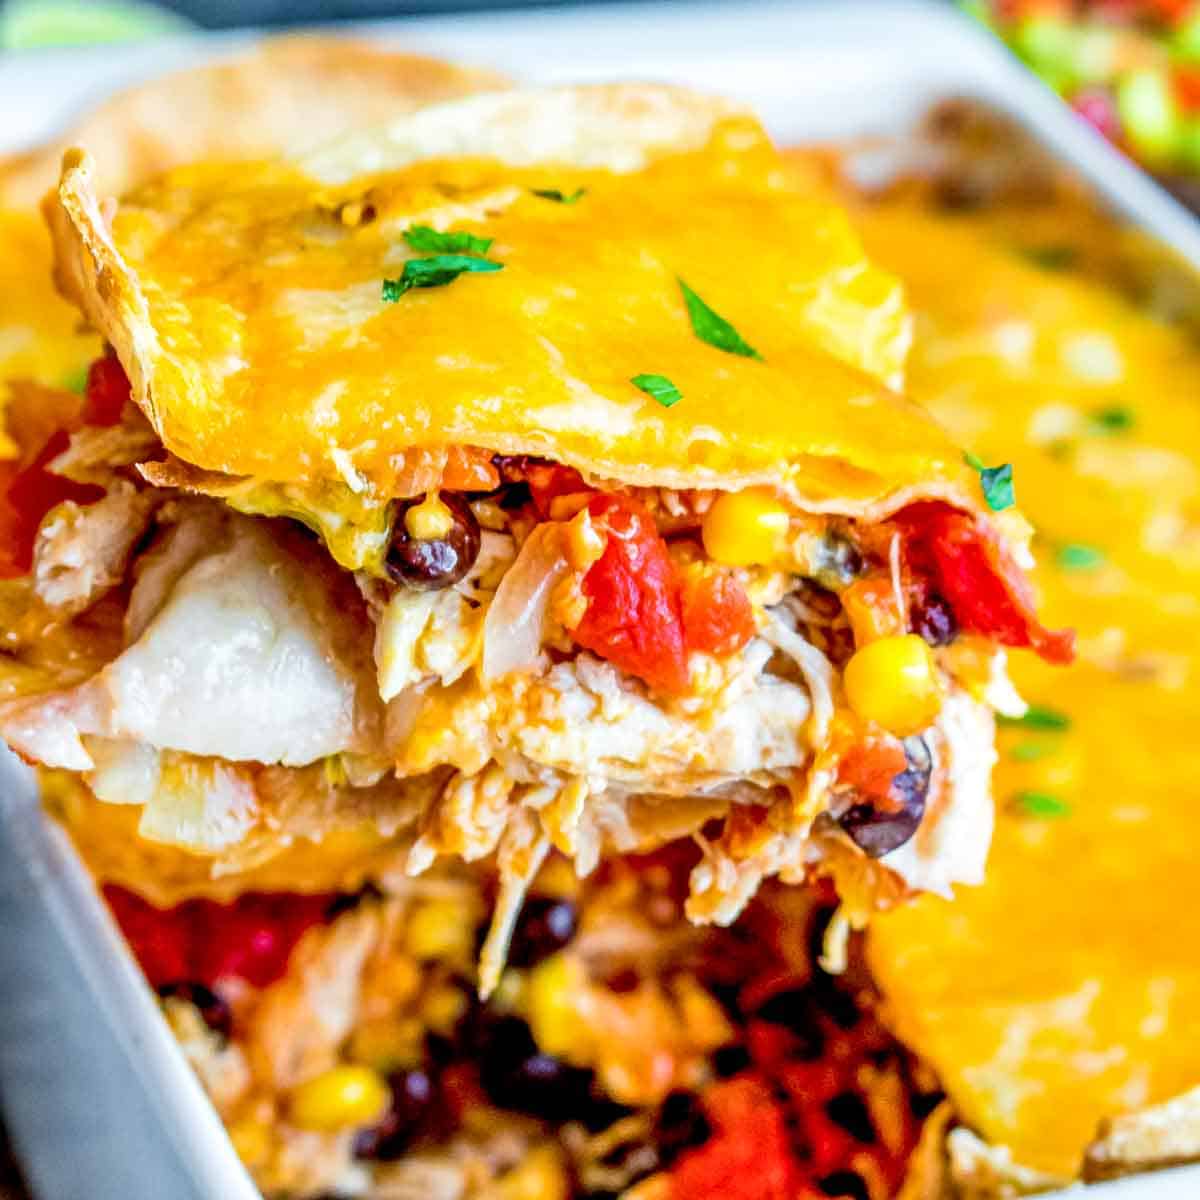 A close-up of a Chicken Tortilla Casserole slice topped with melted cheese, showing layers with vegetables and beans.